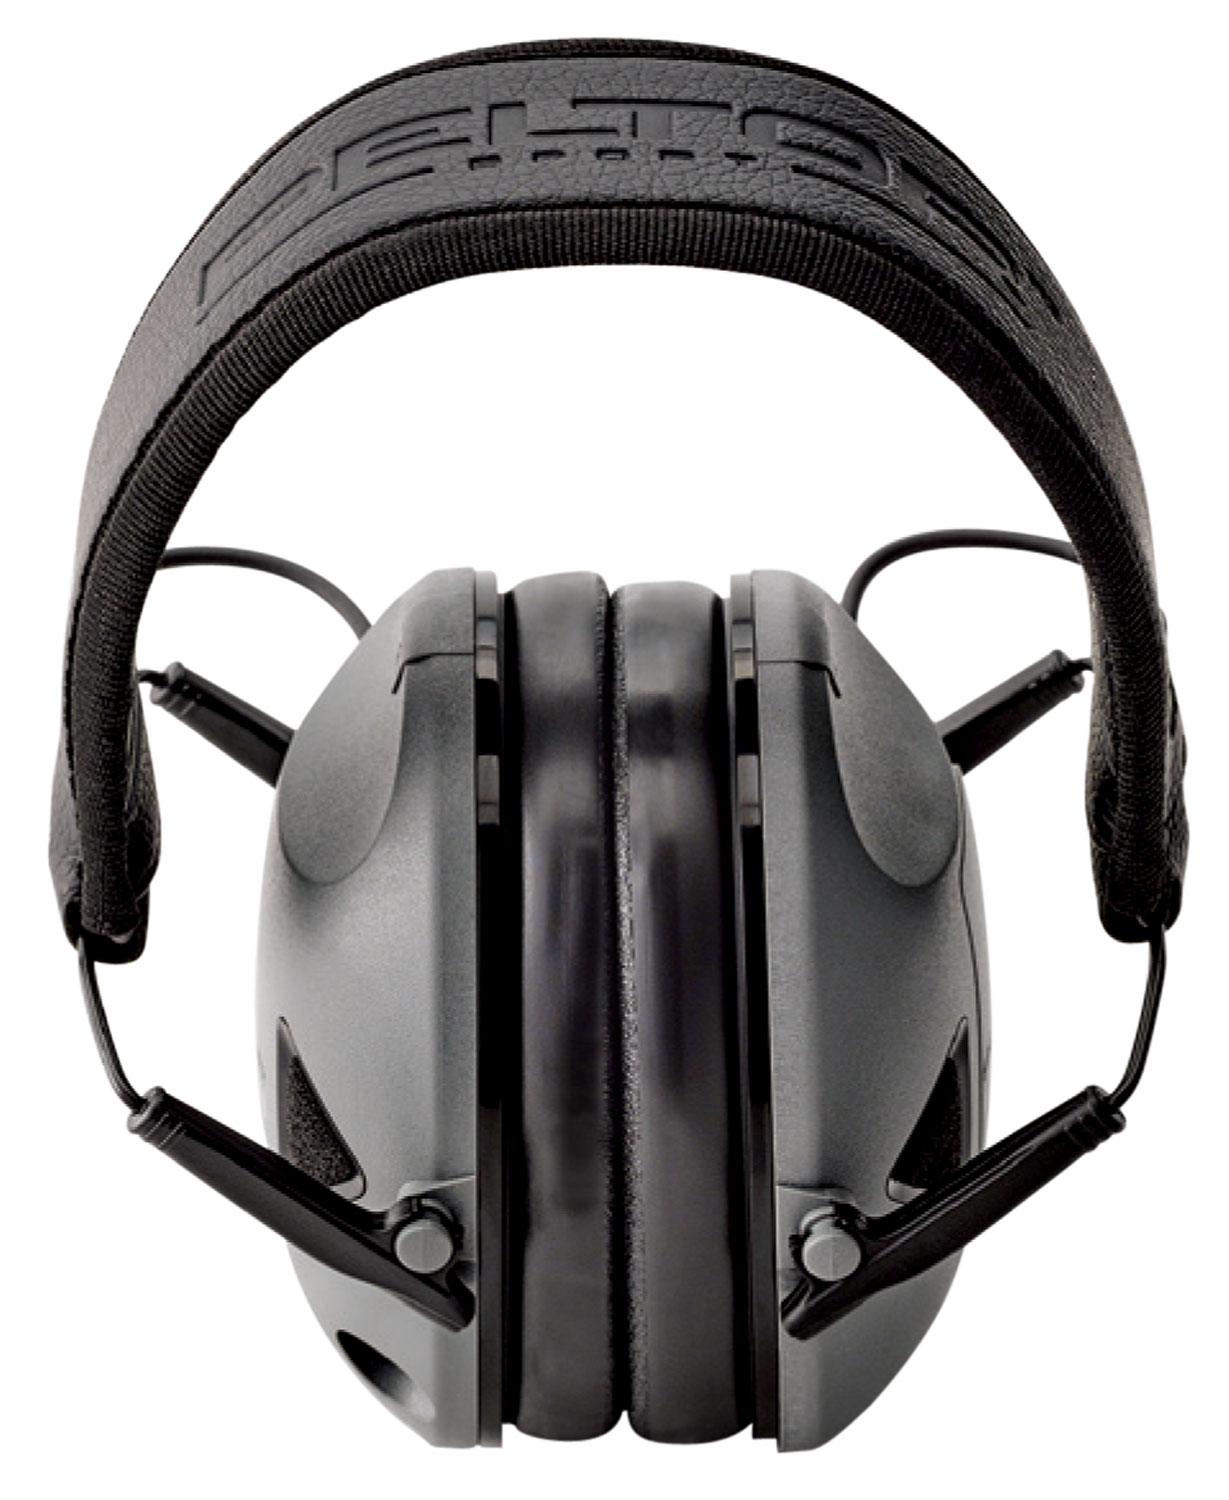 Peltor RGOTH4 Sport RangeGuard 21 dB Over the Head Gray Ear Cups with  Adjustable Black Headband for Adults Pair White Birch Armory